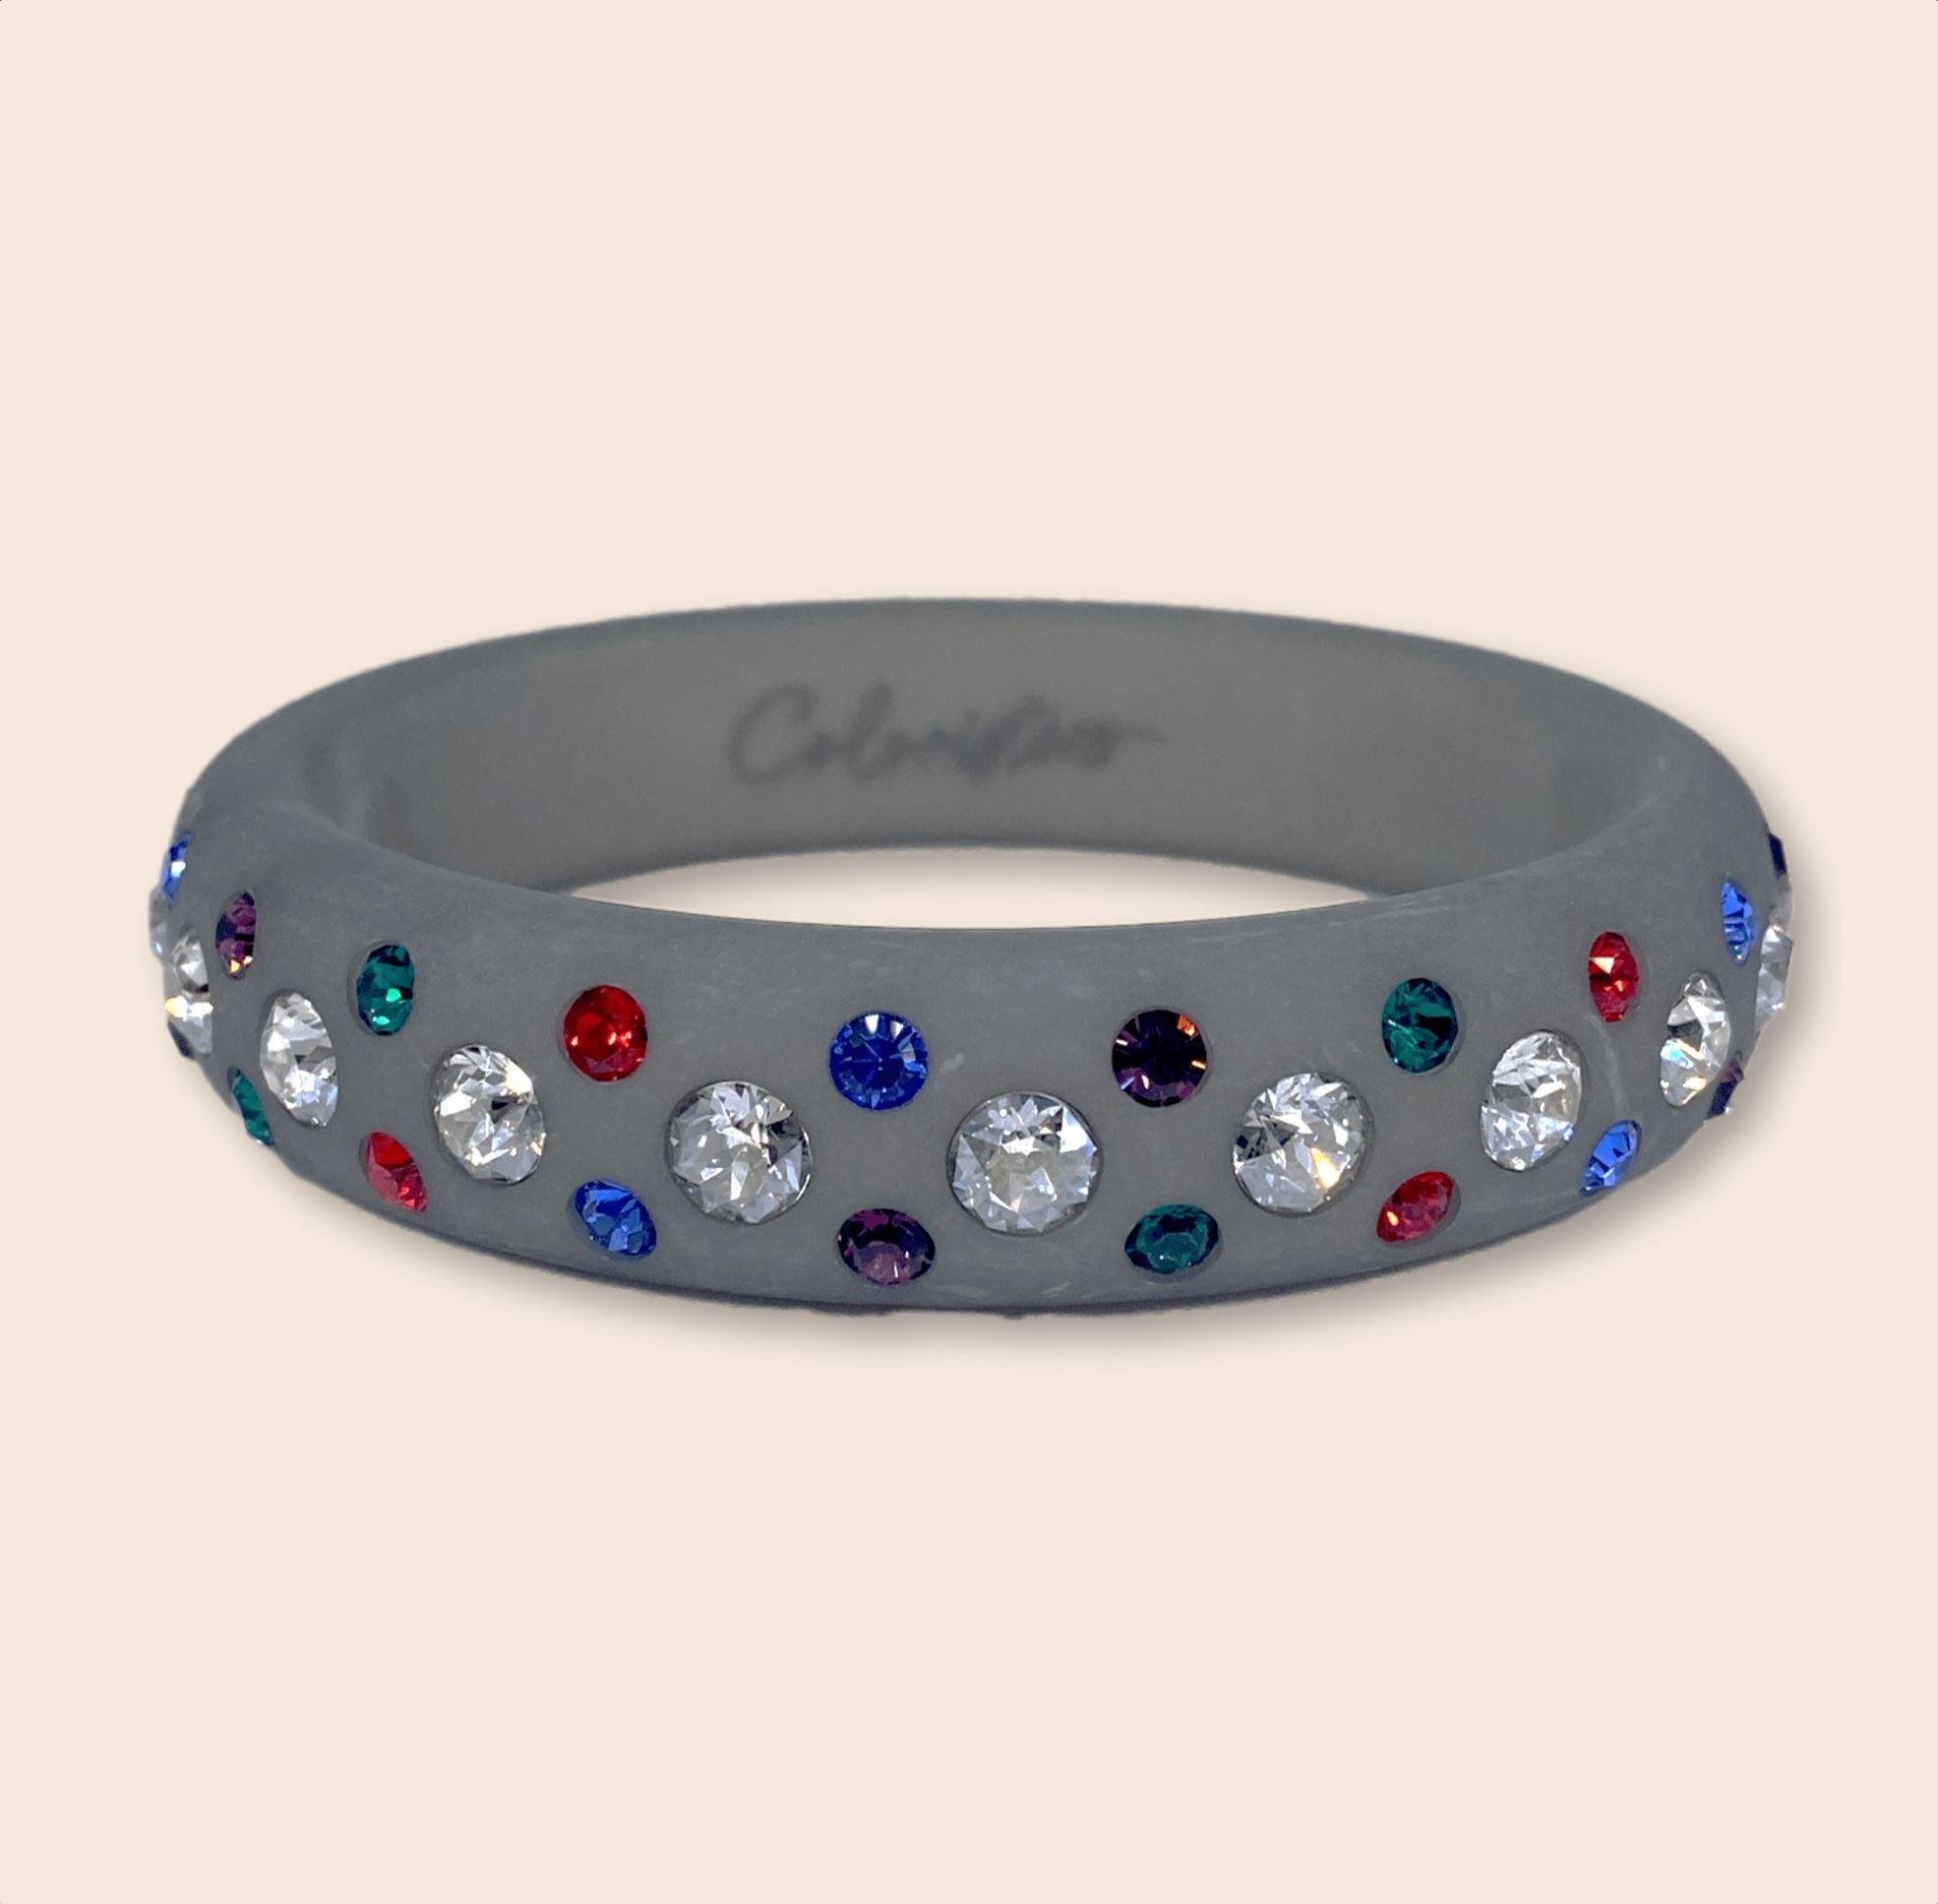 Grauer Coloristers Armreifen mit bunten Kristallen. Grey Coloristers Bangle with colorful crystals.